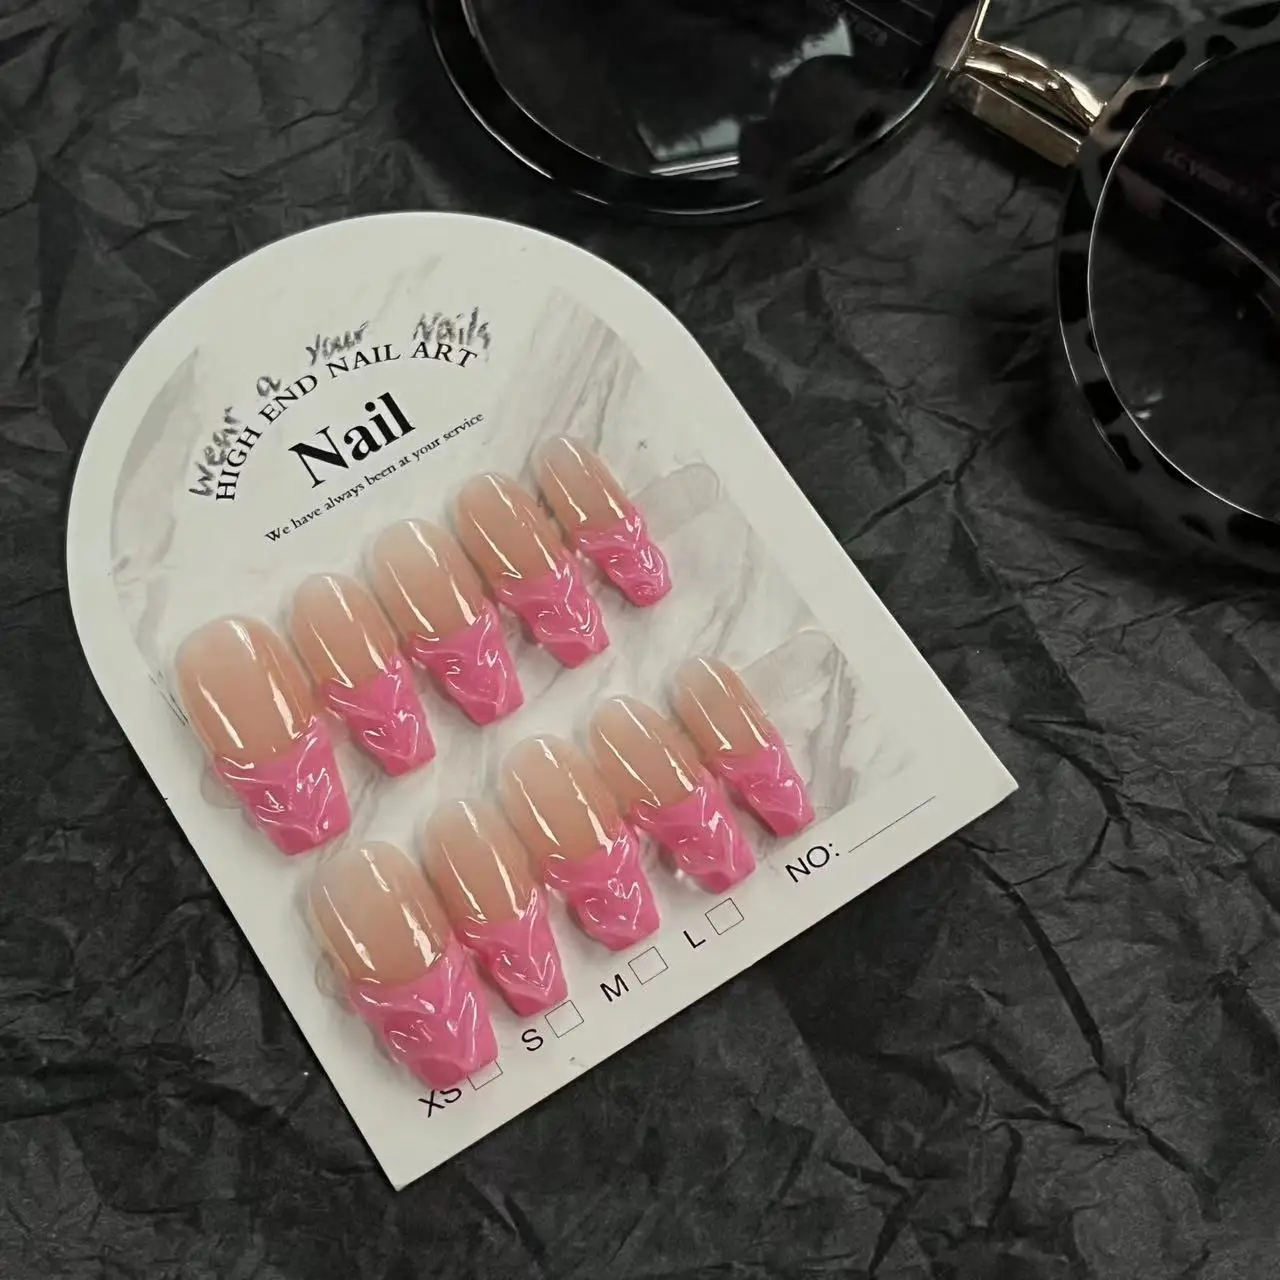 

10pcs y2k Spice Handmade Press on Nails Pink Long Coffin Fake Full Cover Mermaid Tail Design Artificial Manicure Wearable Nail